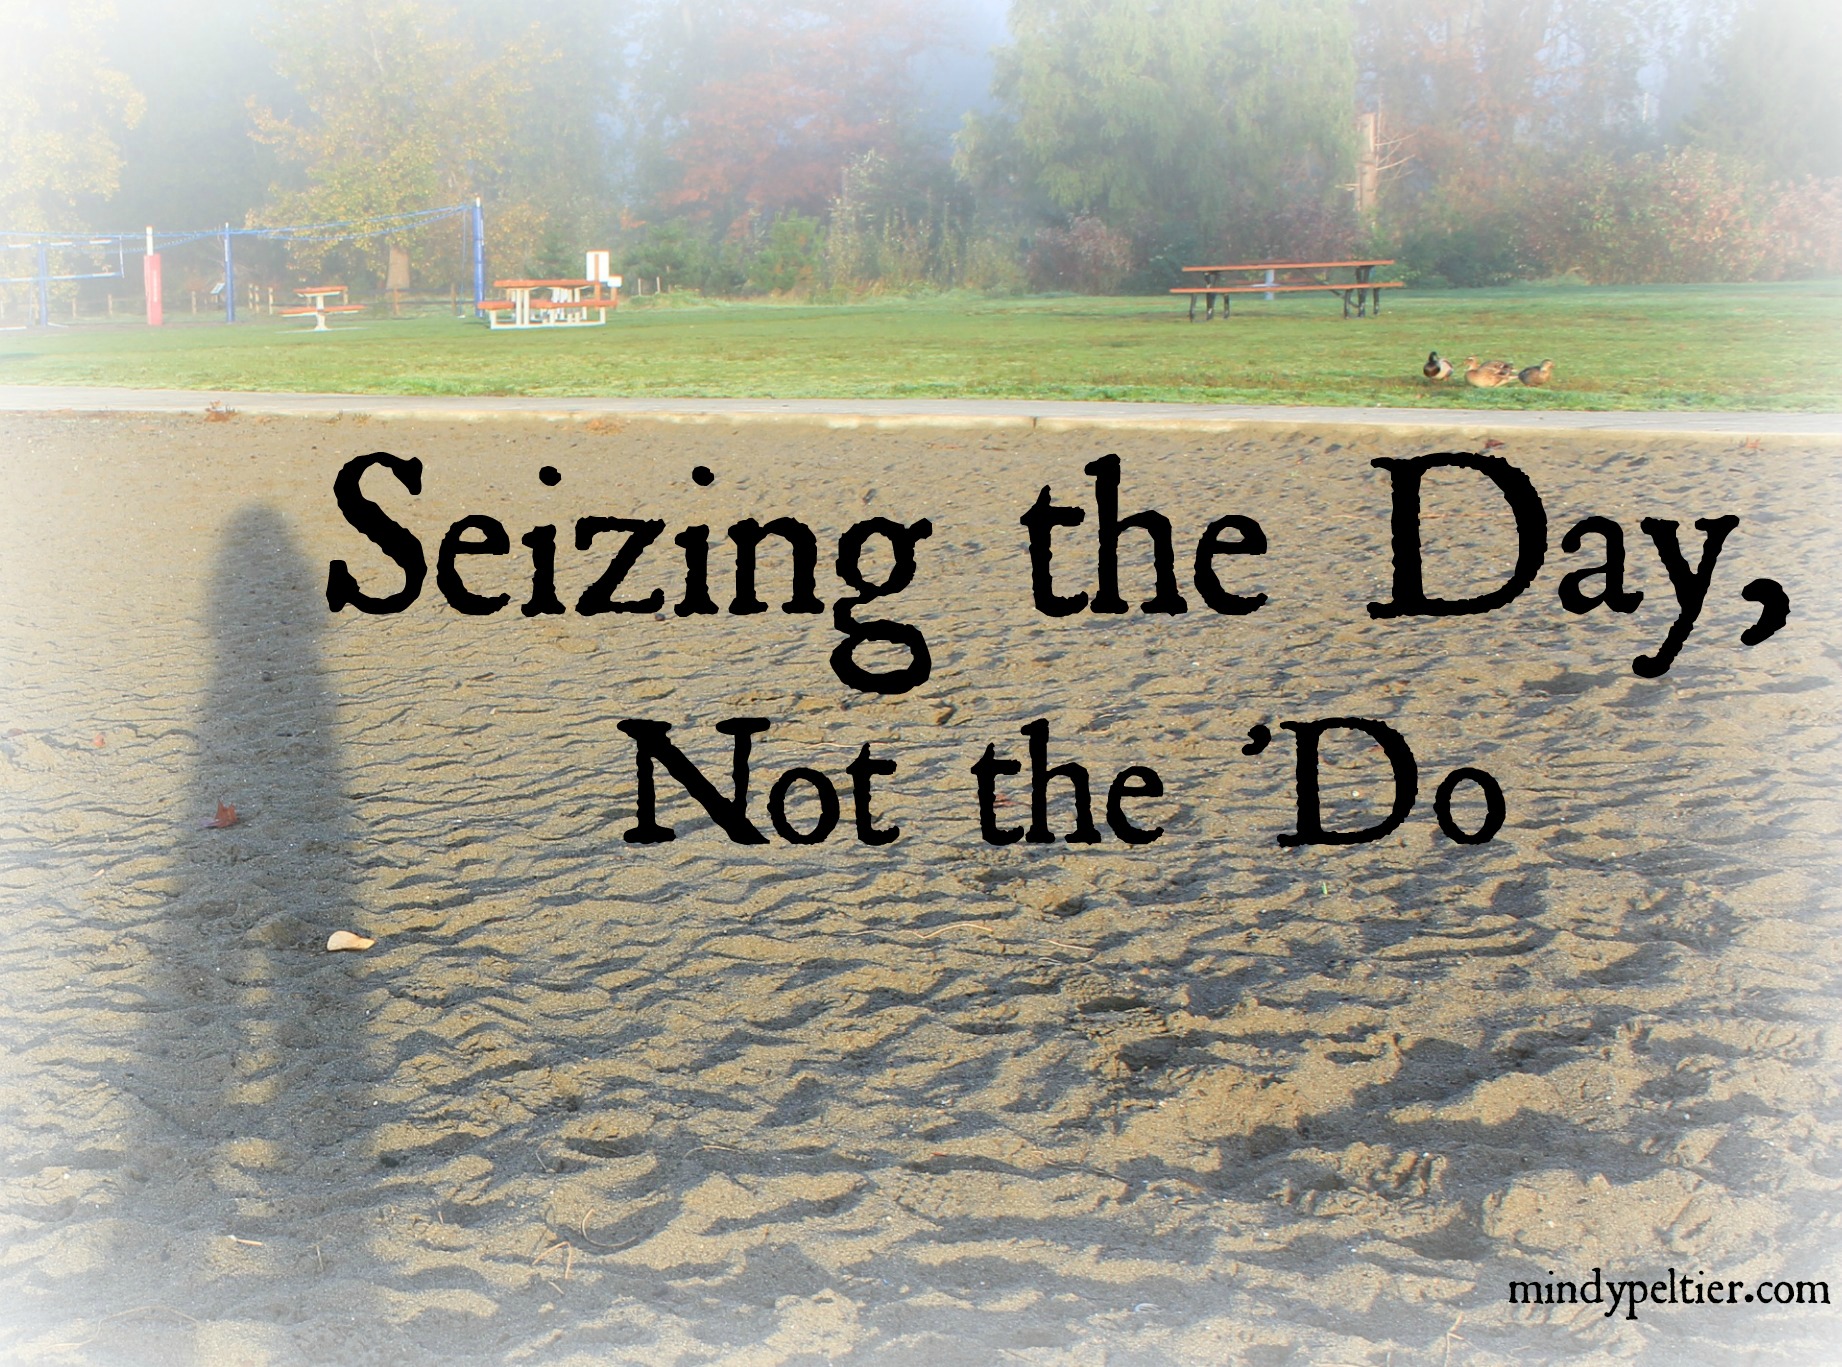 Seizing the Day, Not the ‘Do